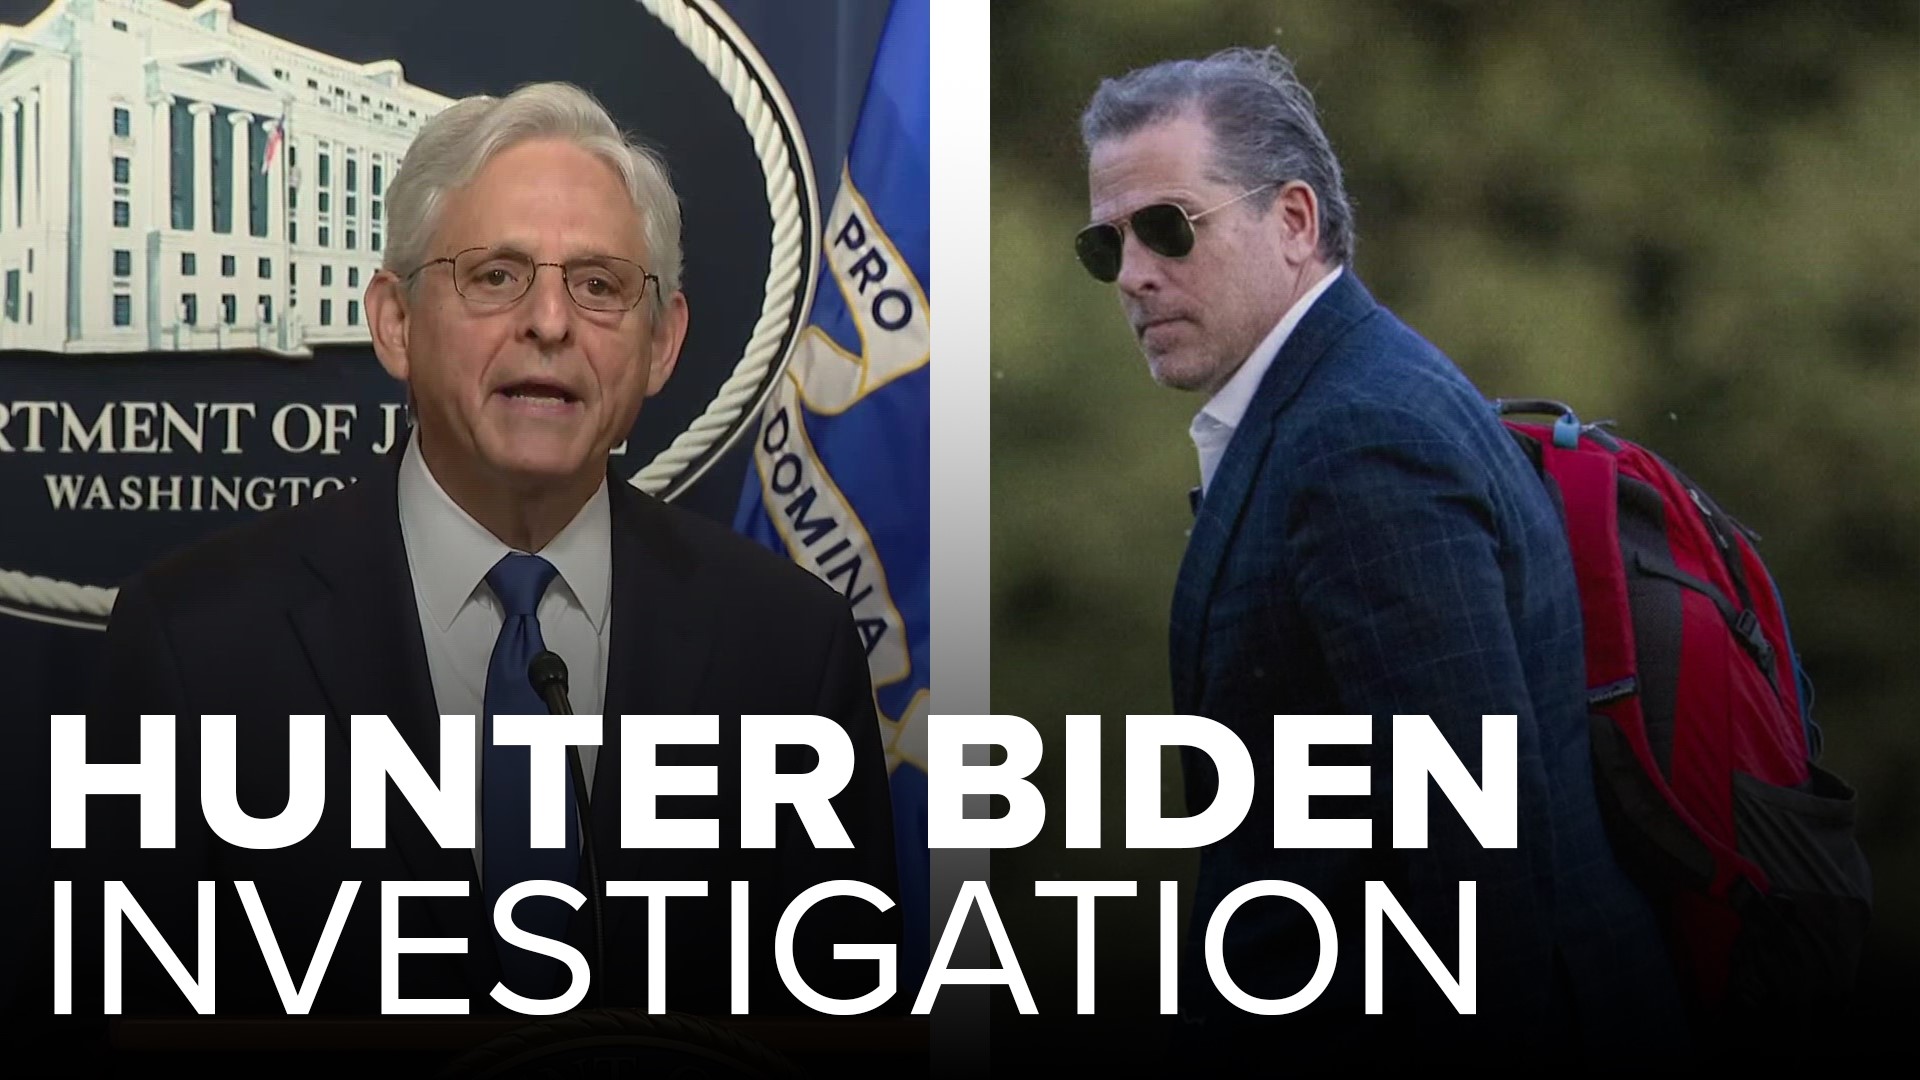 In July, Hunter Biden entered a plea agreement with the U.S. Justice Department, but the deal fell apart.